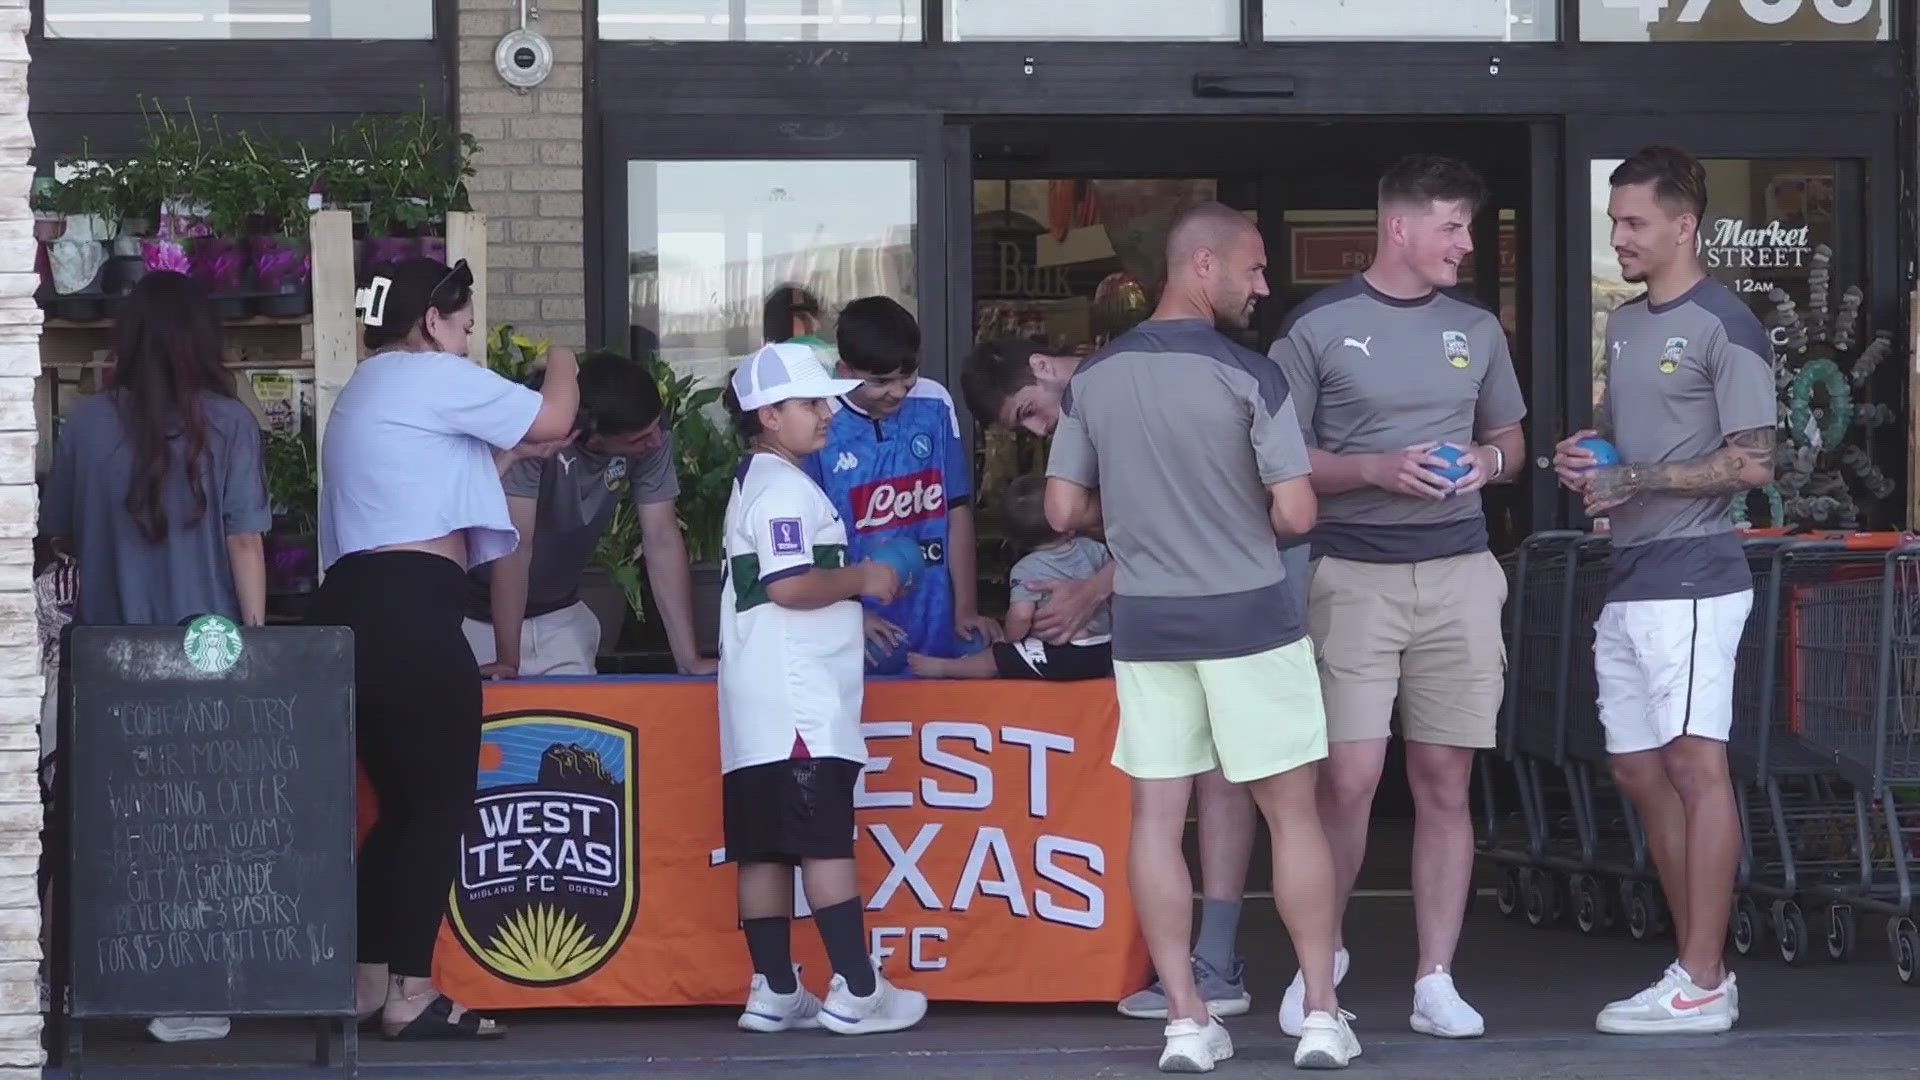 Some of the players stopped by Market Streets in Midland and Odessa to say hello to some fans.